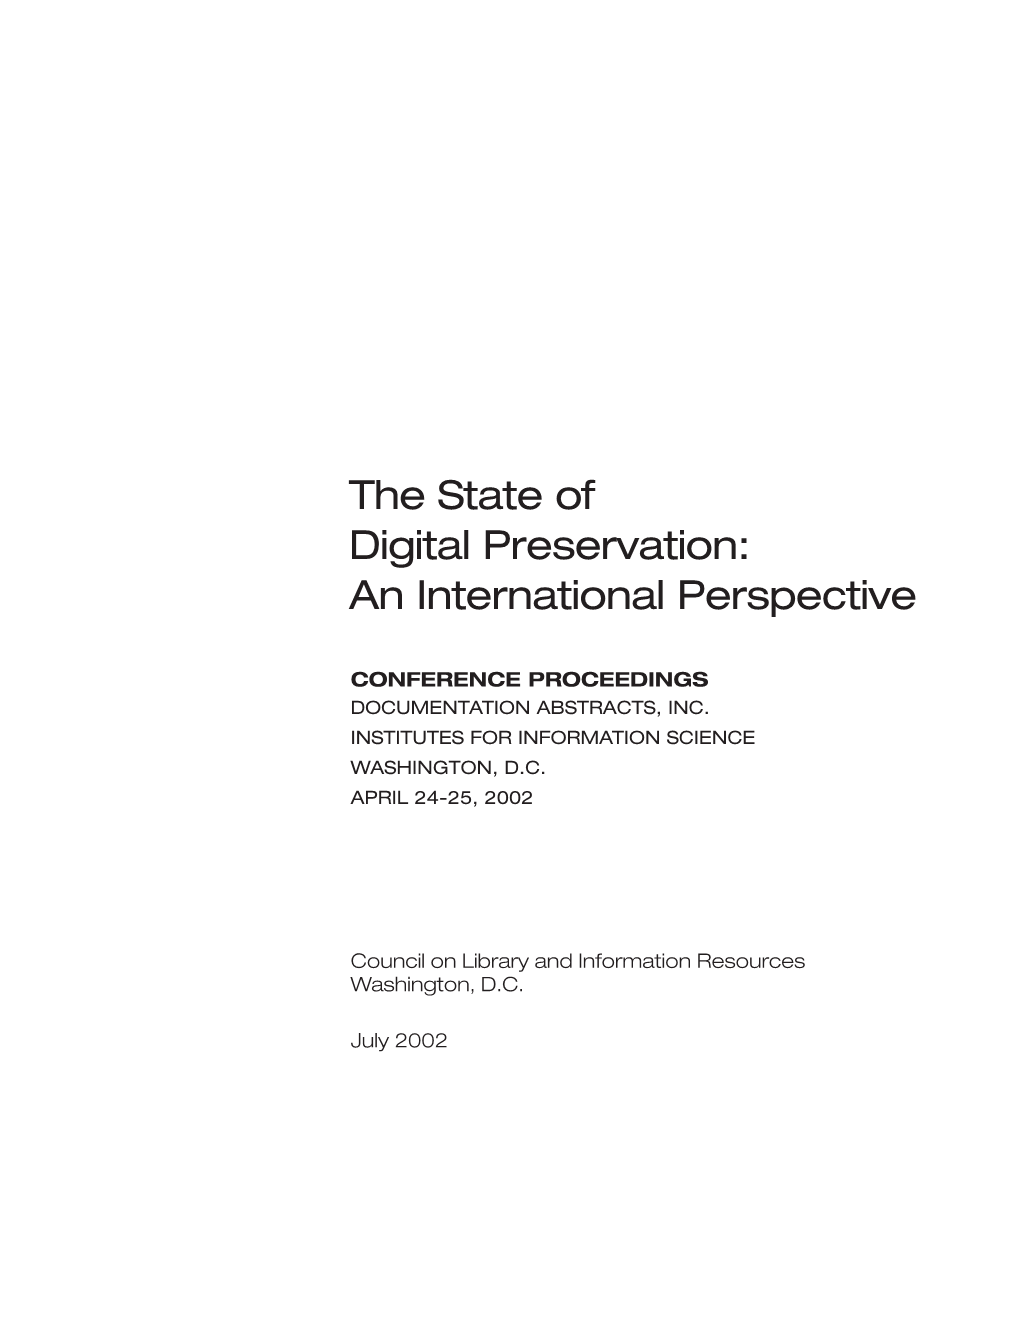 The State of Digital Preservation: an International Perspective